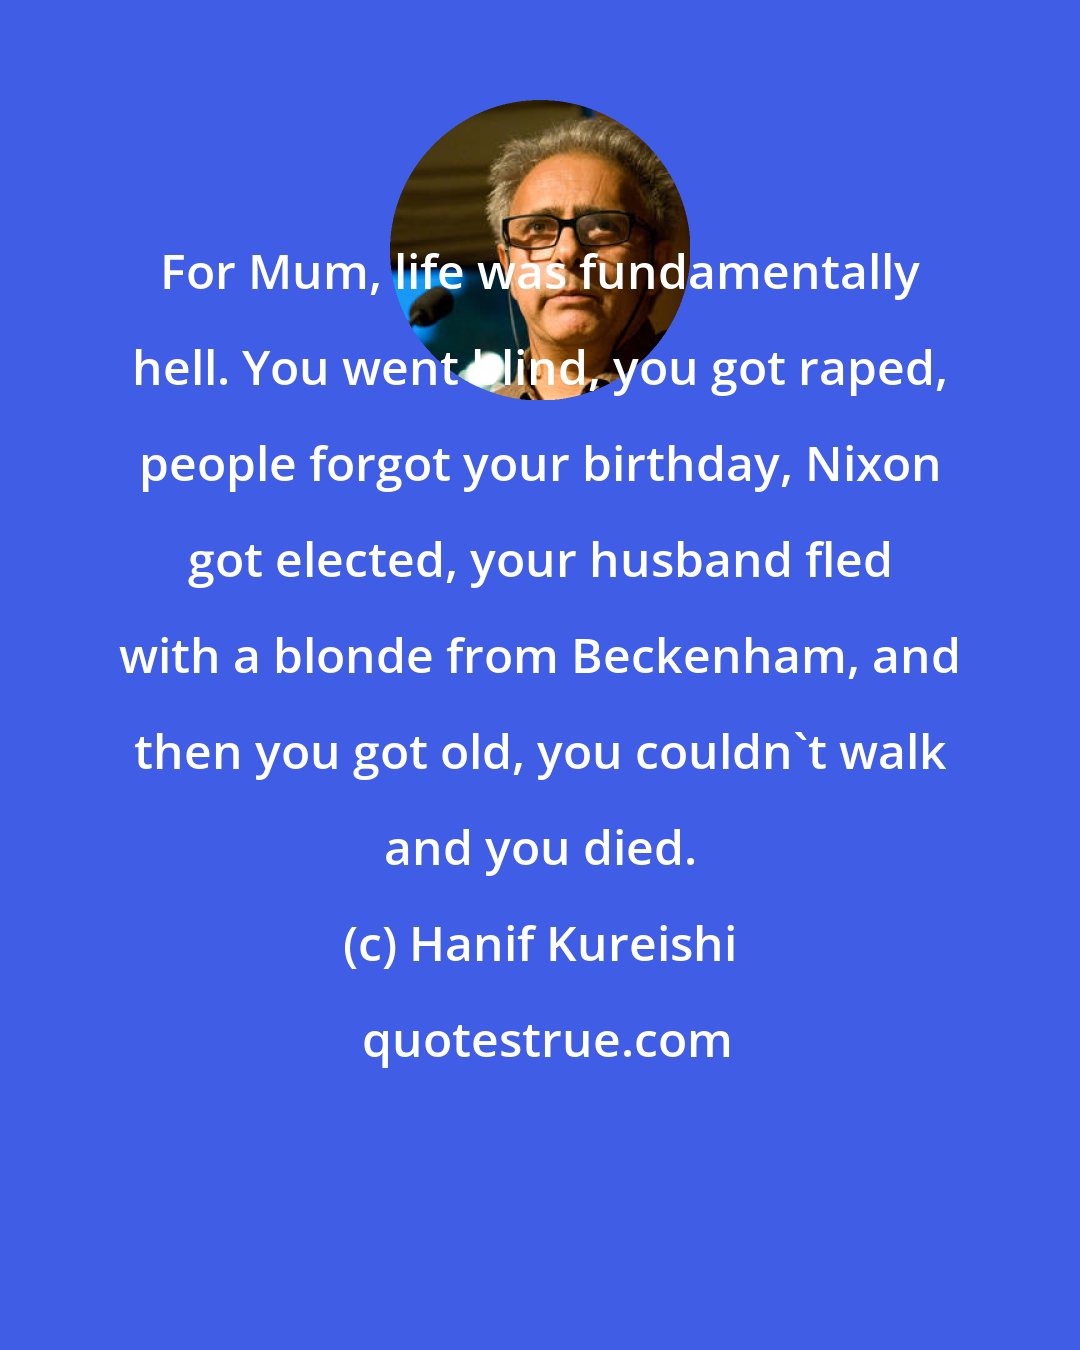 Hanif Kureishi: For Mum, life was fundamentally hell. You went blind, you got raped, people forgot your birthday, Nixon got elected, your husband fled with a blonde from Beckenham, and then you got old, you couldn't walk and you died.